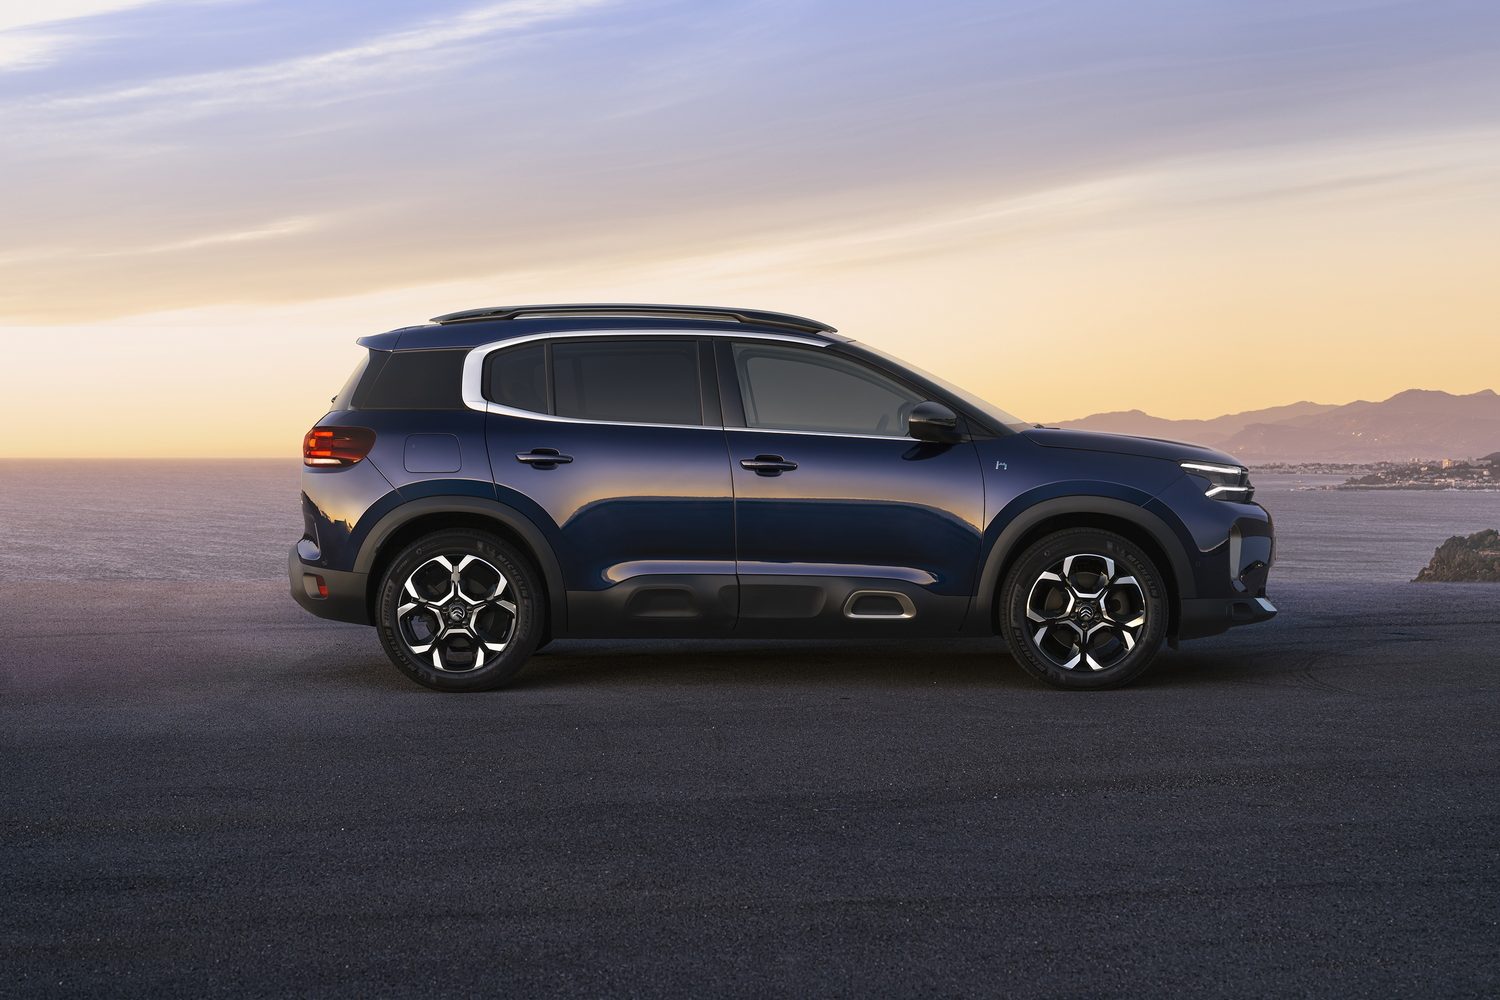 Facelifted Citroen C5 Aircross unveiled